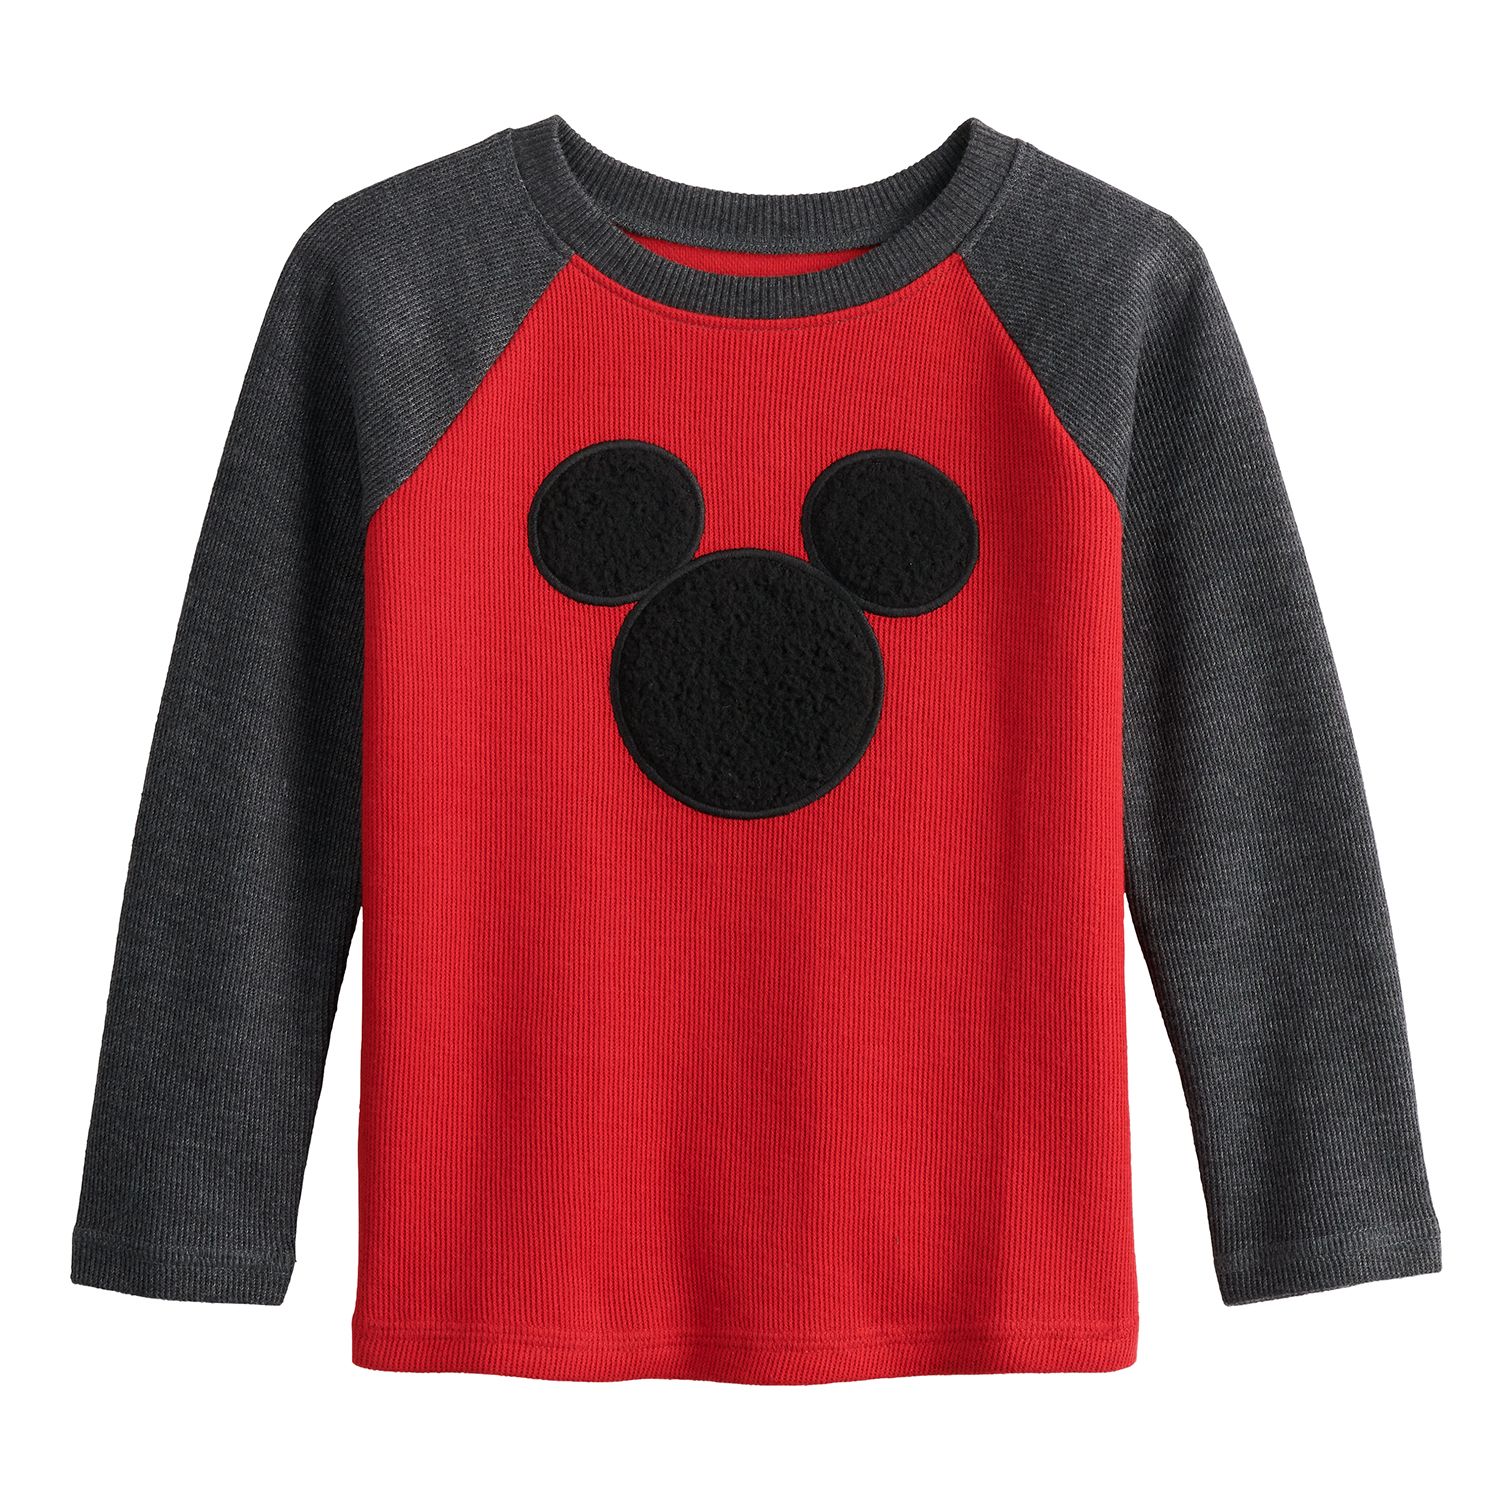 Image for Disney/Jumping Beans Disney's Mickey Mouse Toddler Boy Raglan Tee by Jumping Beans® at Kohl's.